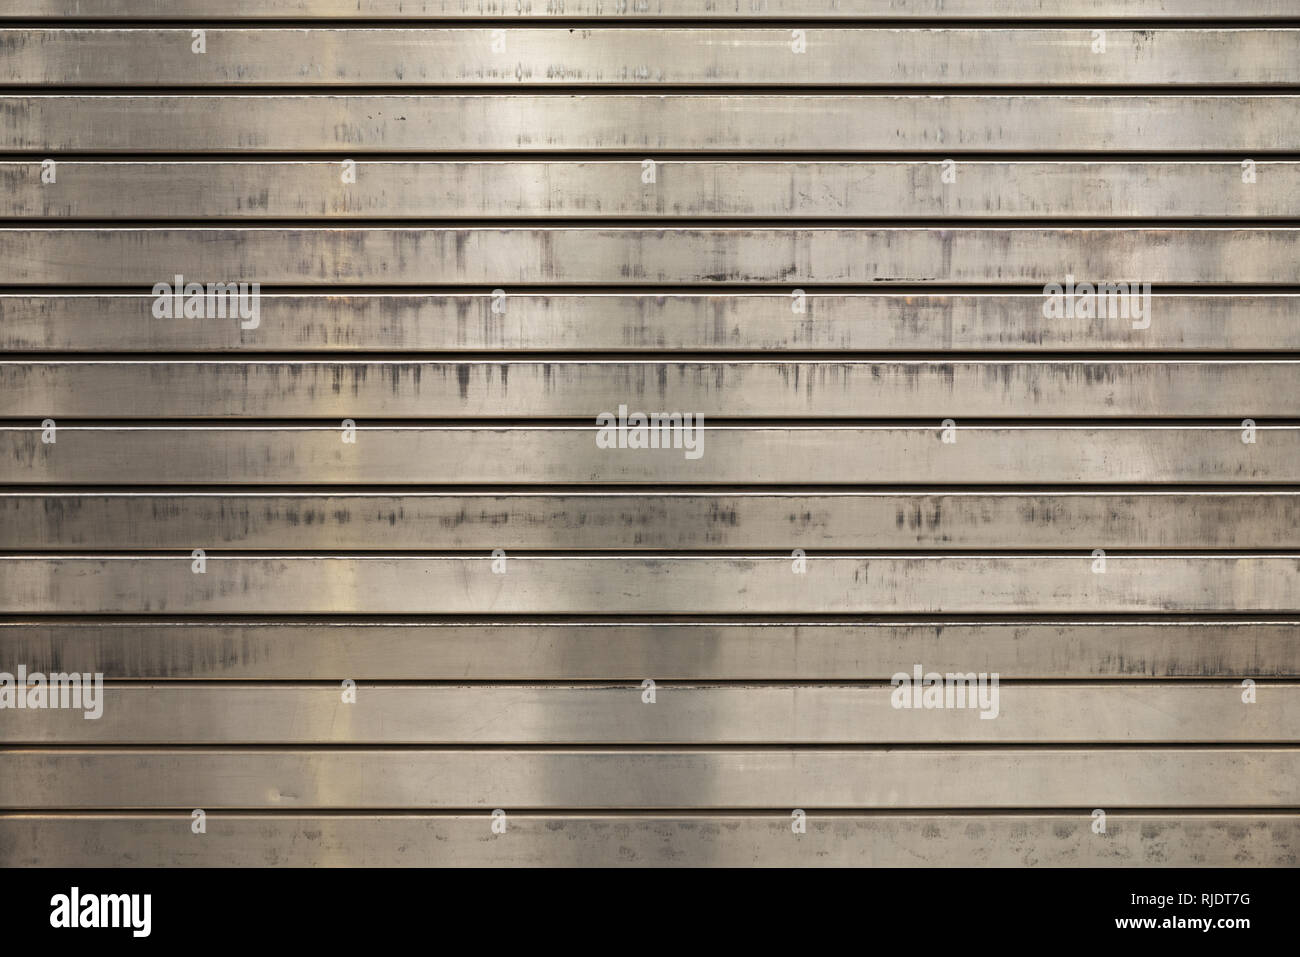 grunge scratched and stained metal roll up door background with horizontal slats Stock Photo